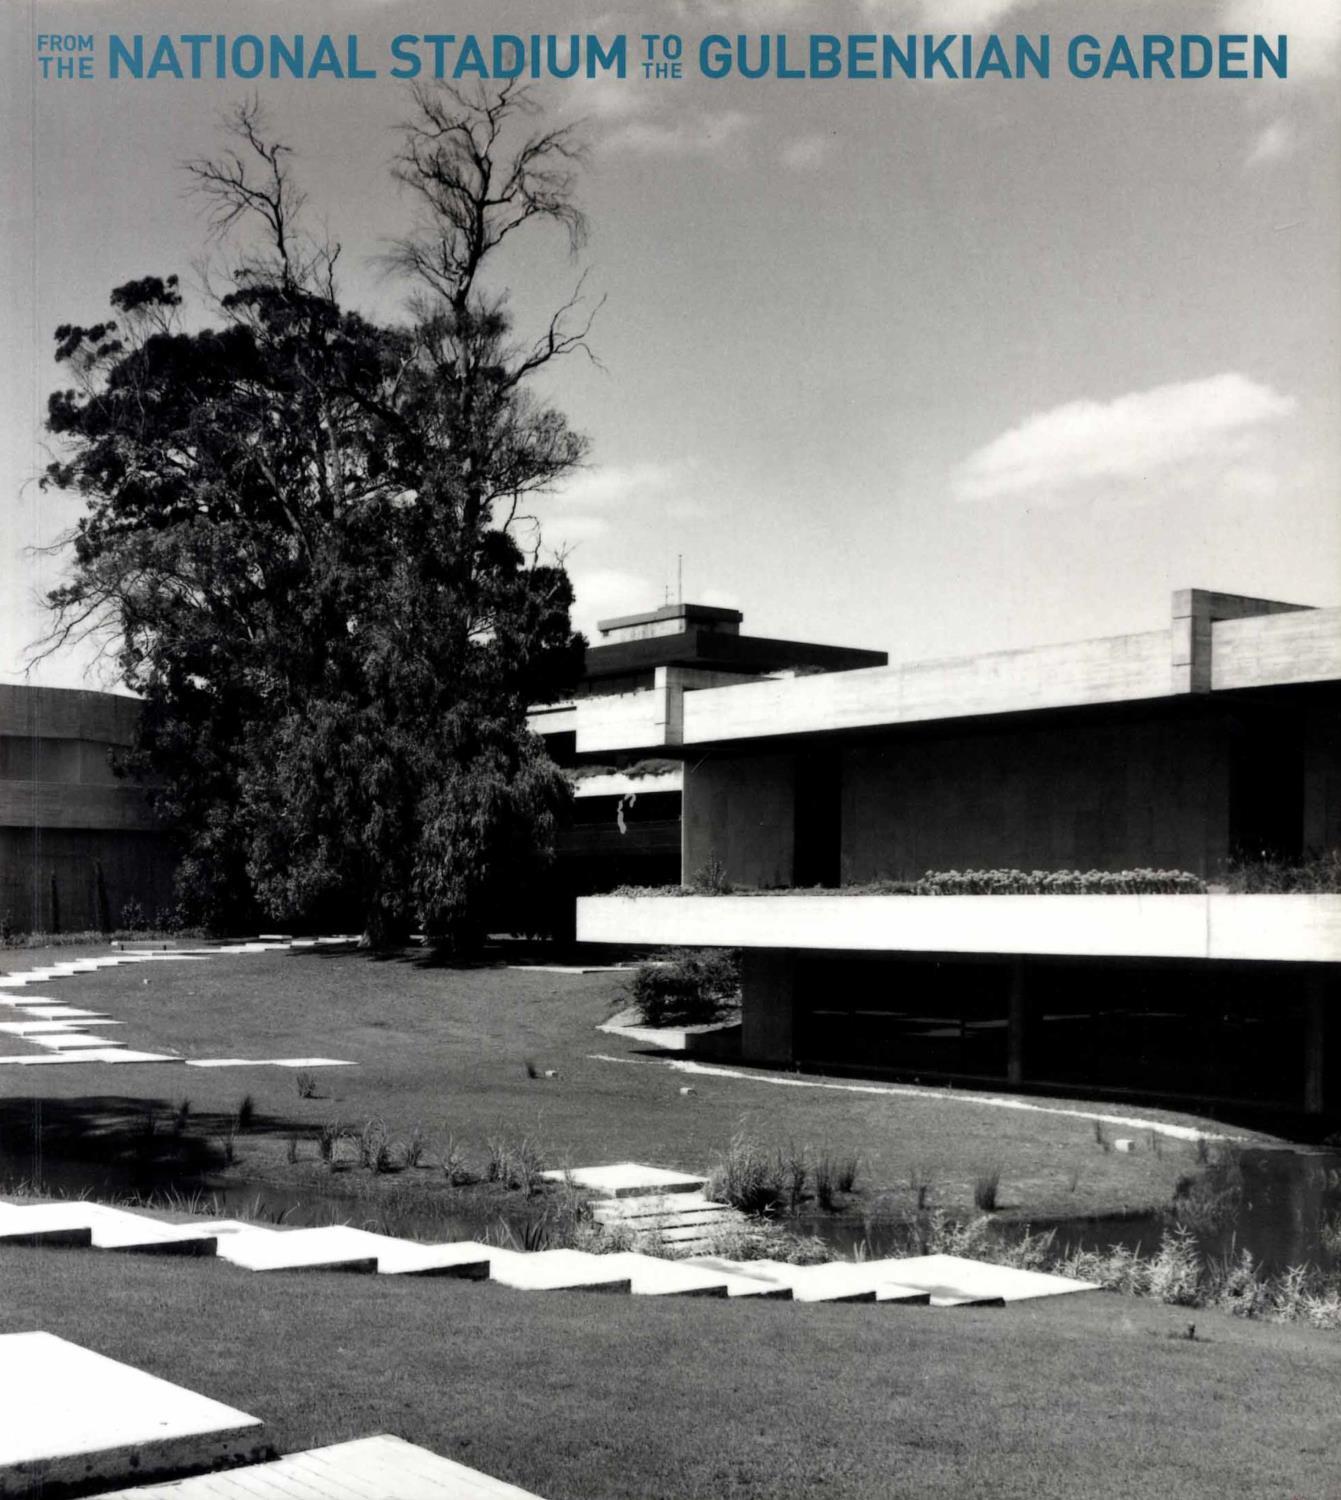 From the National Stadium to the Gulbenkian Garden. Francisco Caldeira Cabral and the First Generation of Portuguese Landscape Architects, 1940 – 1970